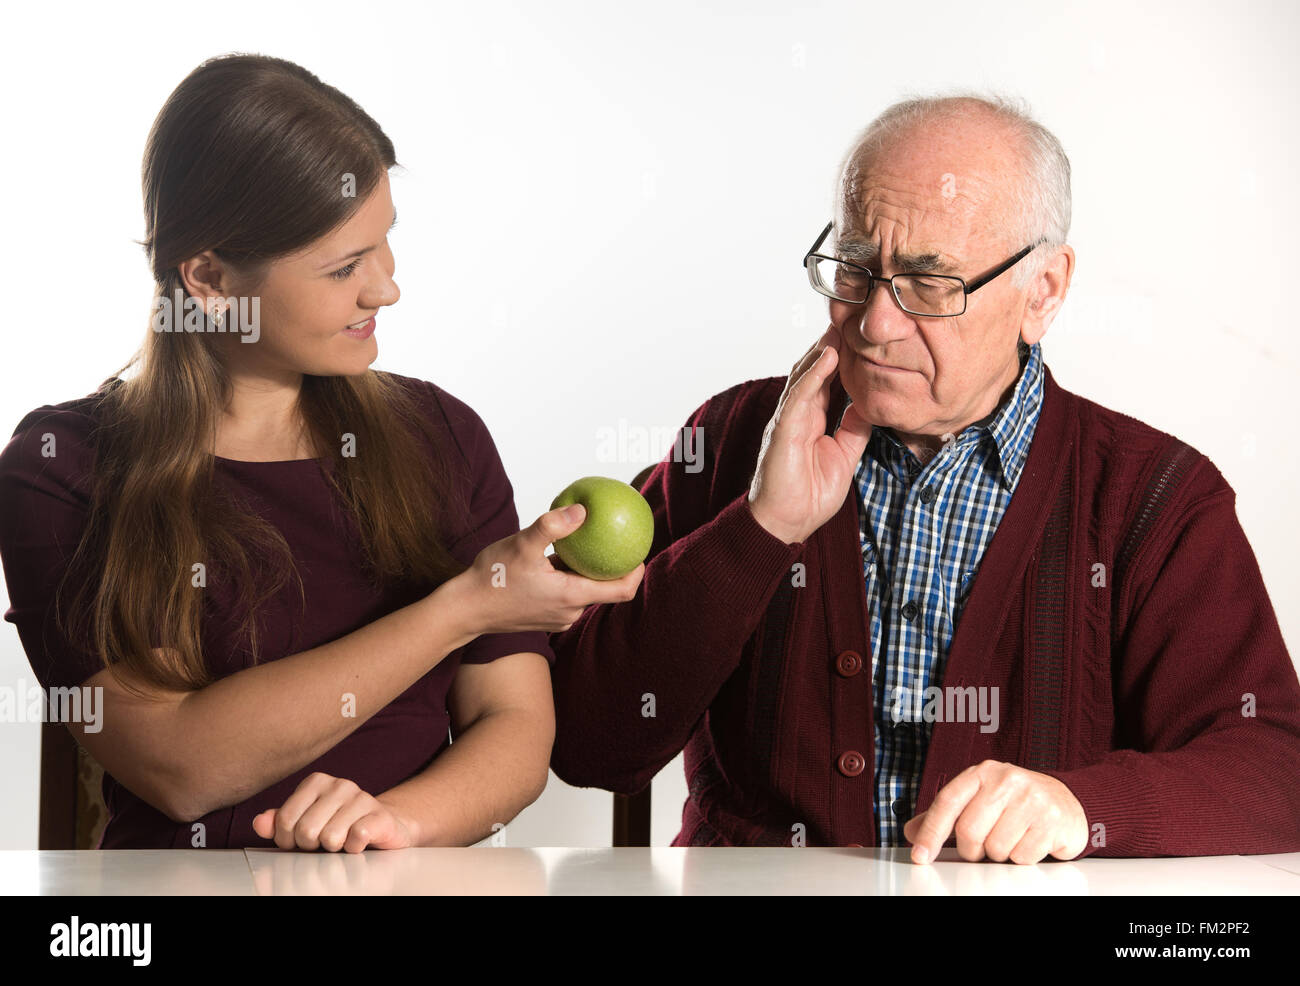 young woman helps senior man to eat green apple Stock Photo